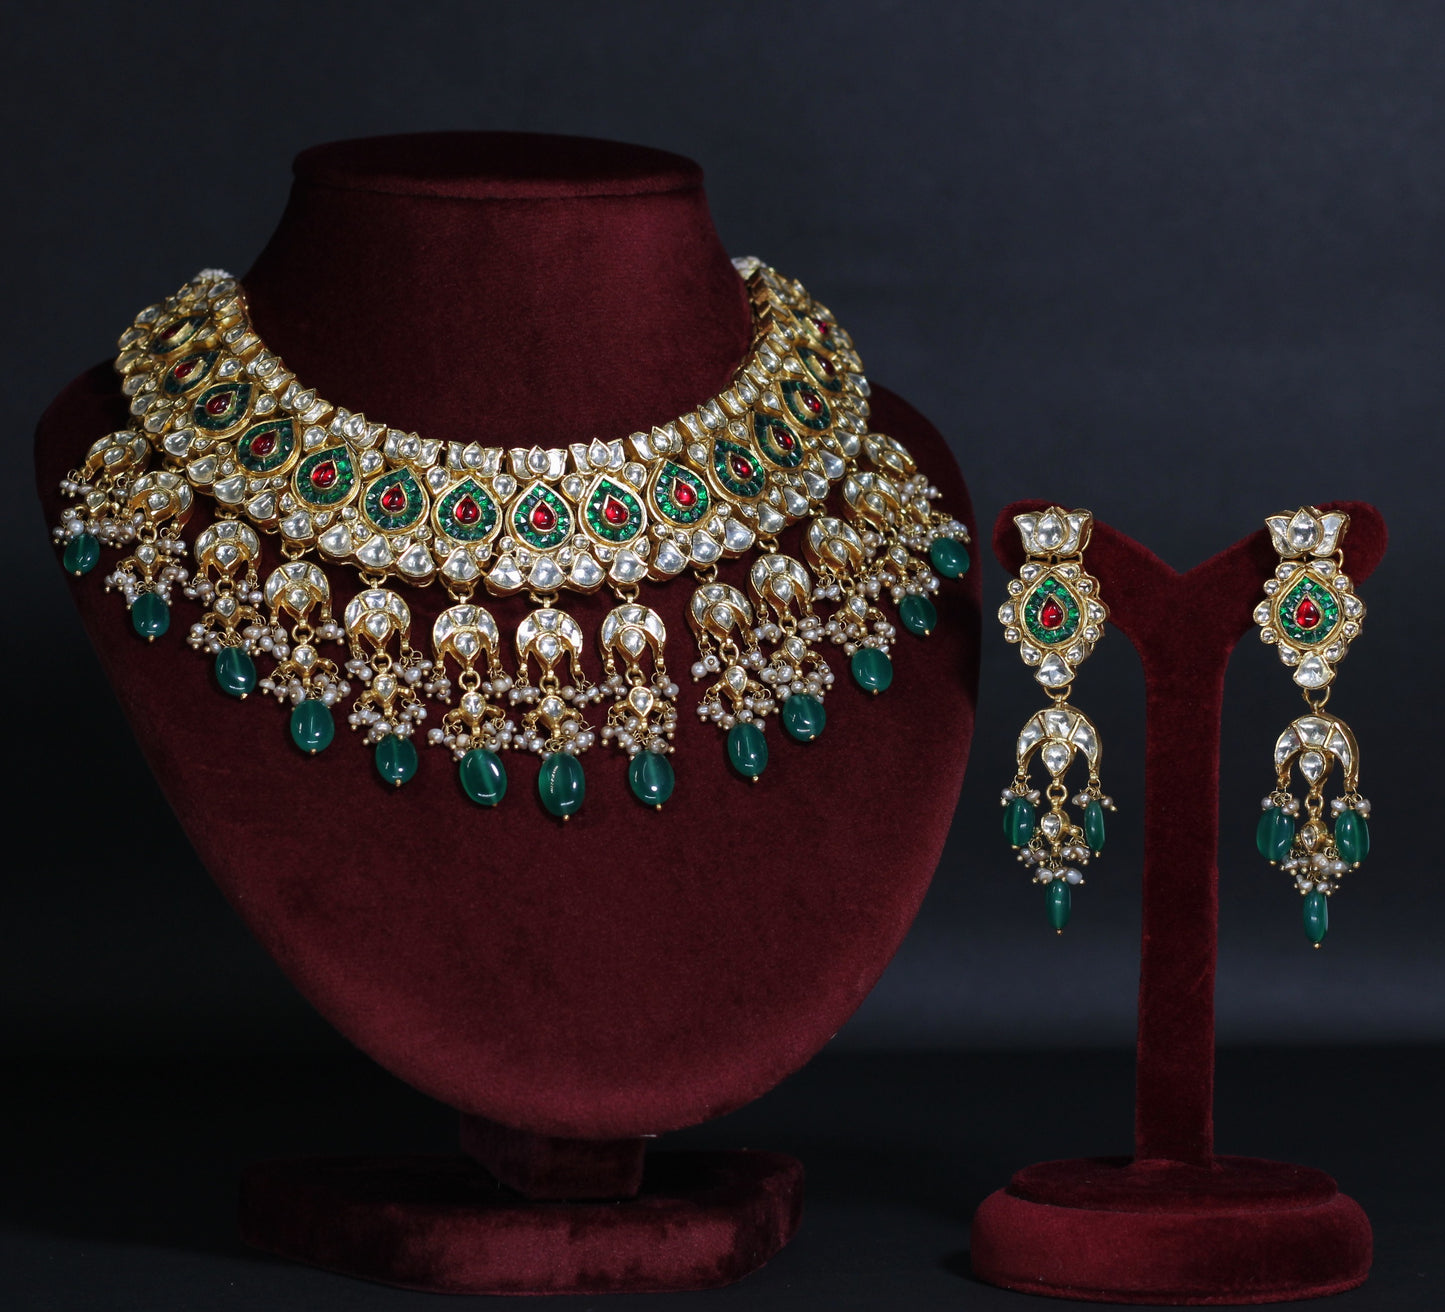 NECKLACE AND EARRING IN92.5 STERLING SILVER  WITH 18KT GOLD PLATED WITH  KUNDAN,GREEN ONYX & RED ONYX AND FRESH WATER PEARLS